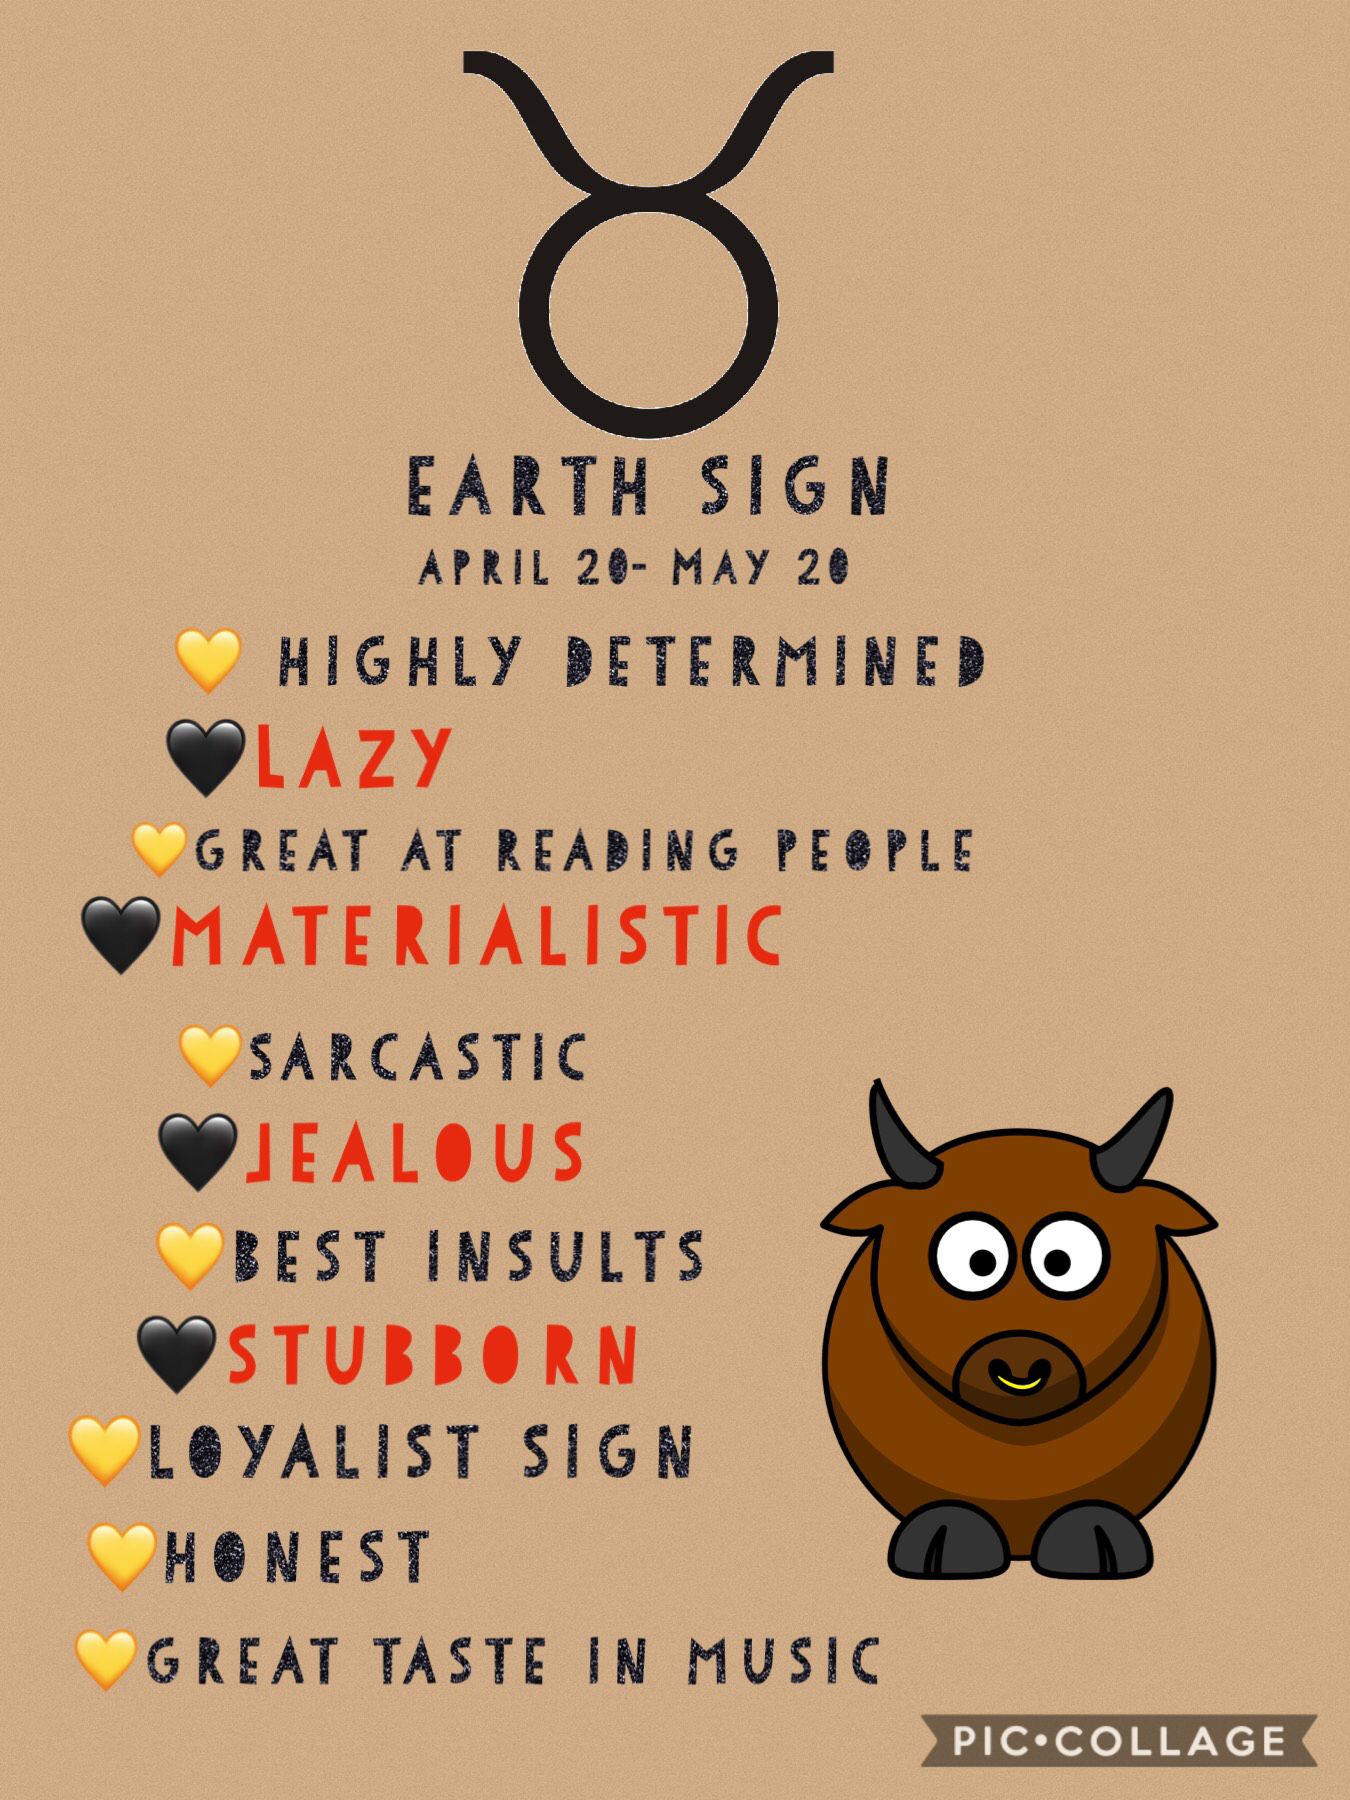 💛good taurus features💛
🖤bad features🖤
what sign should I do next?